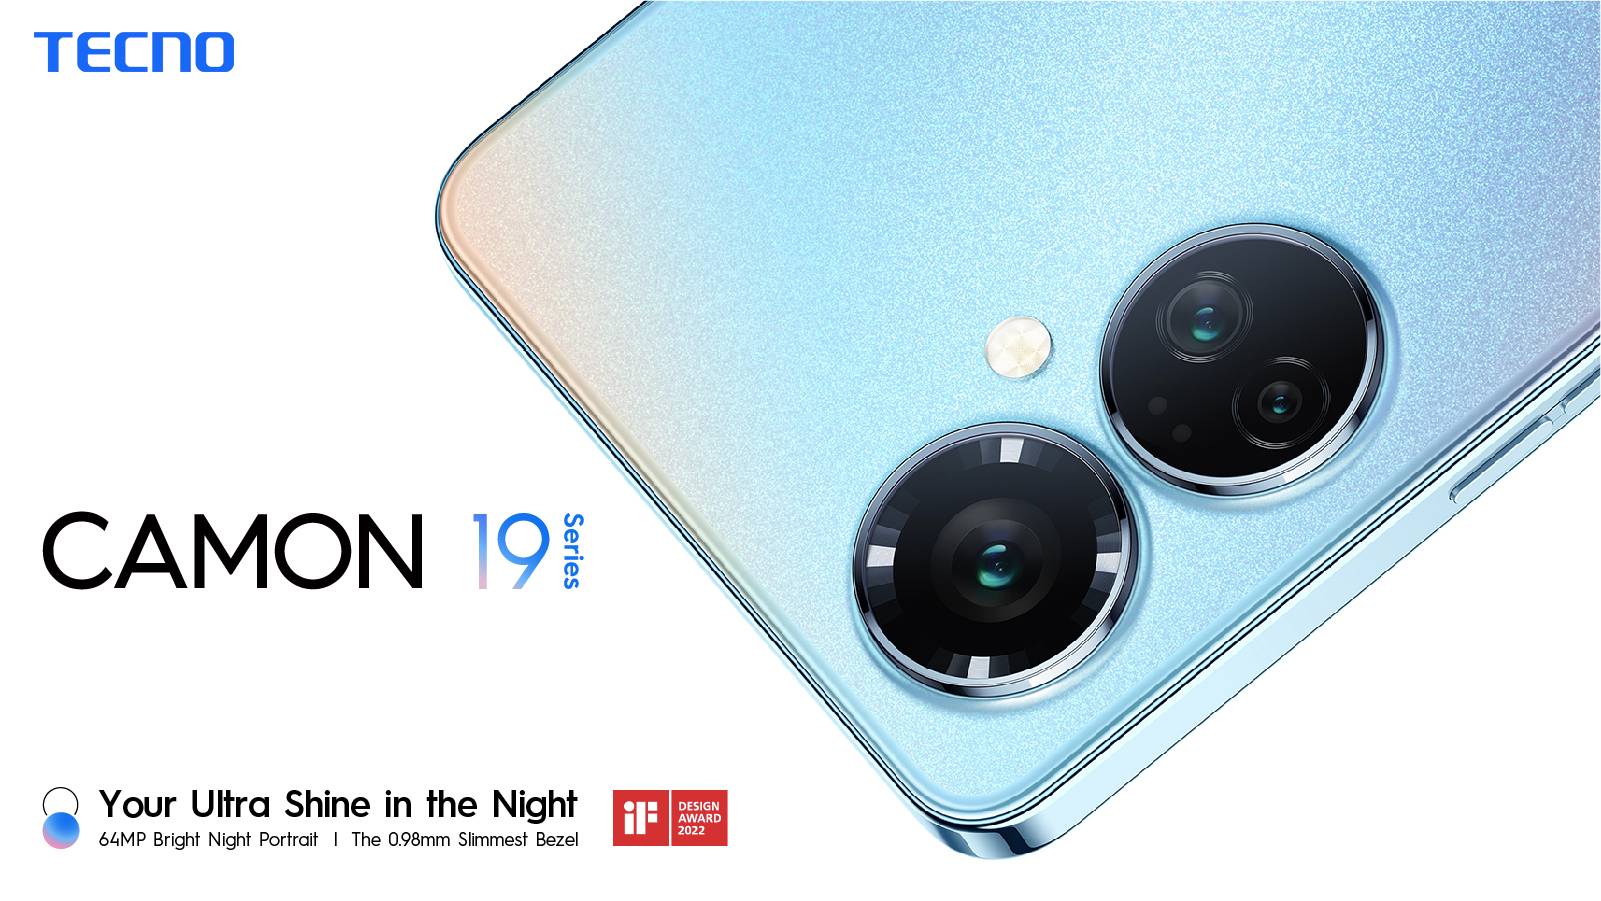 TECNO Launched Camon 19 Pro in Pakistan with 64MP Bright Night Portrait camera with RGBW